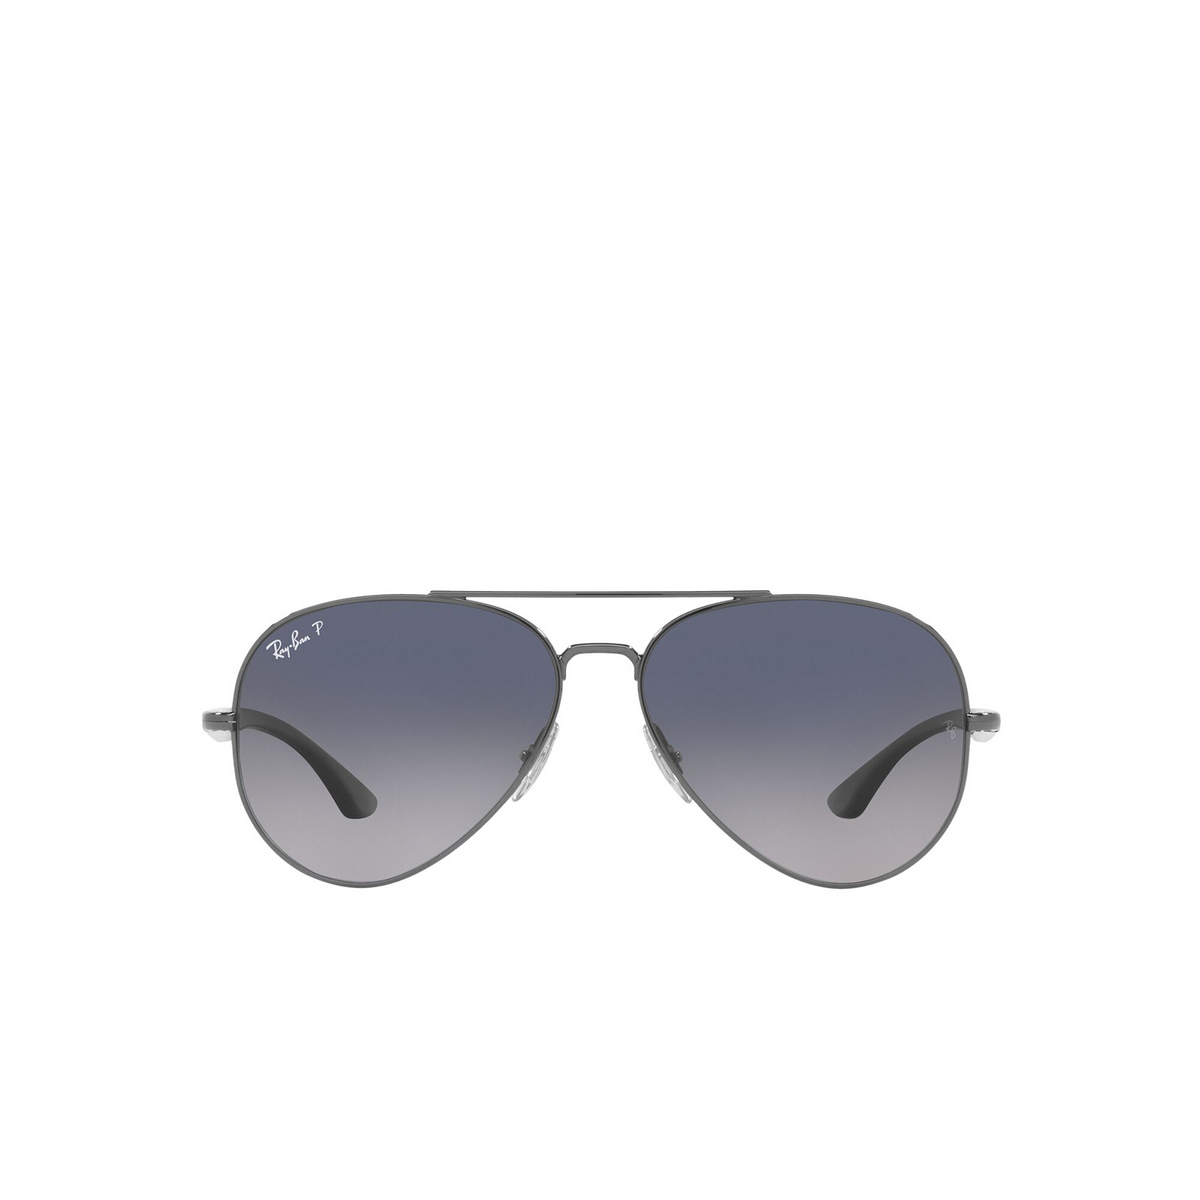 Ray-Ban® Aviator Sunglasses: RB3675 color Gunmetal 004/78 - front view.